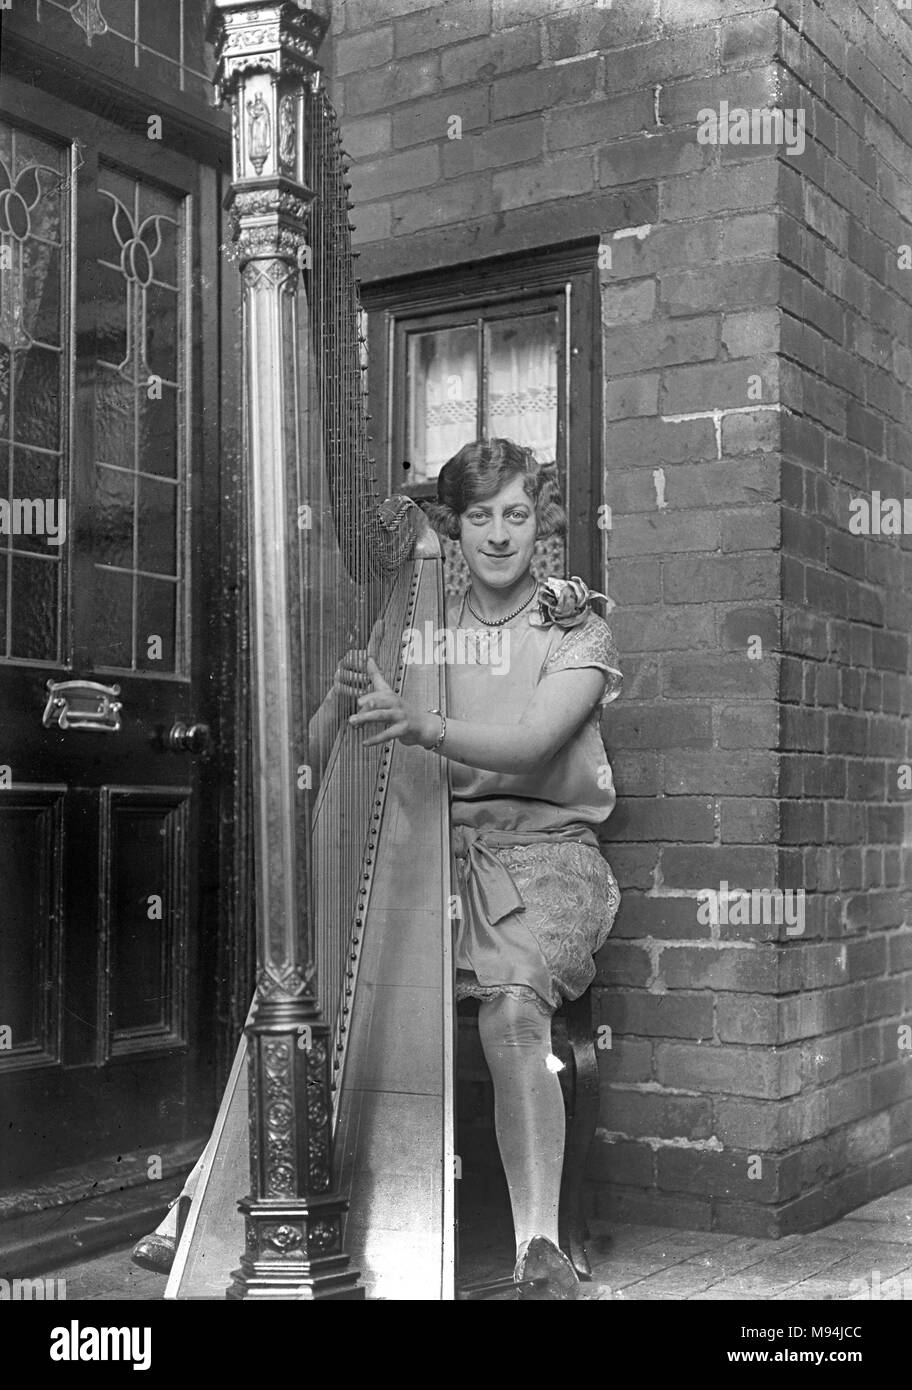 A harpist in England poses with her instrument outside her door, ca. 1910. Stock Photo